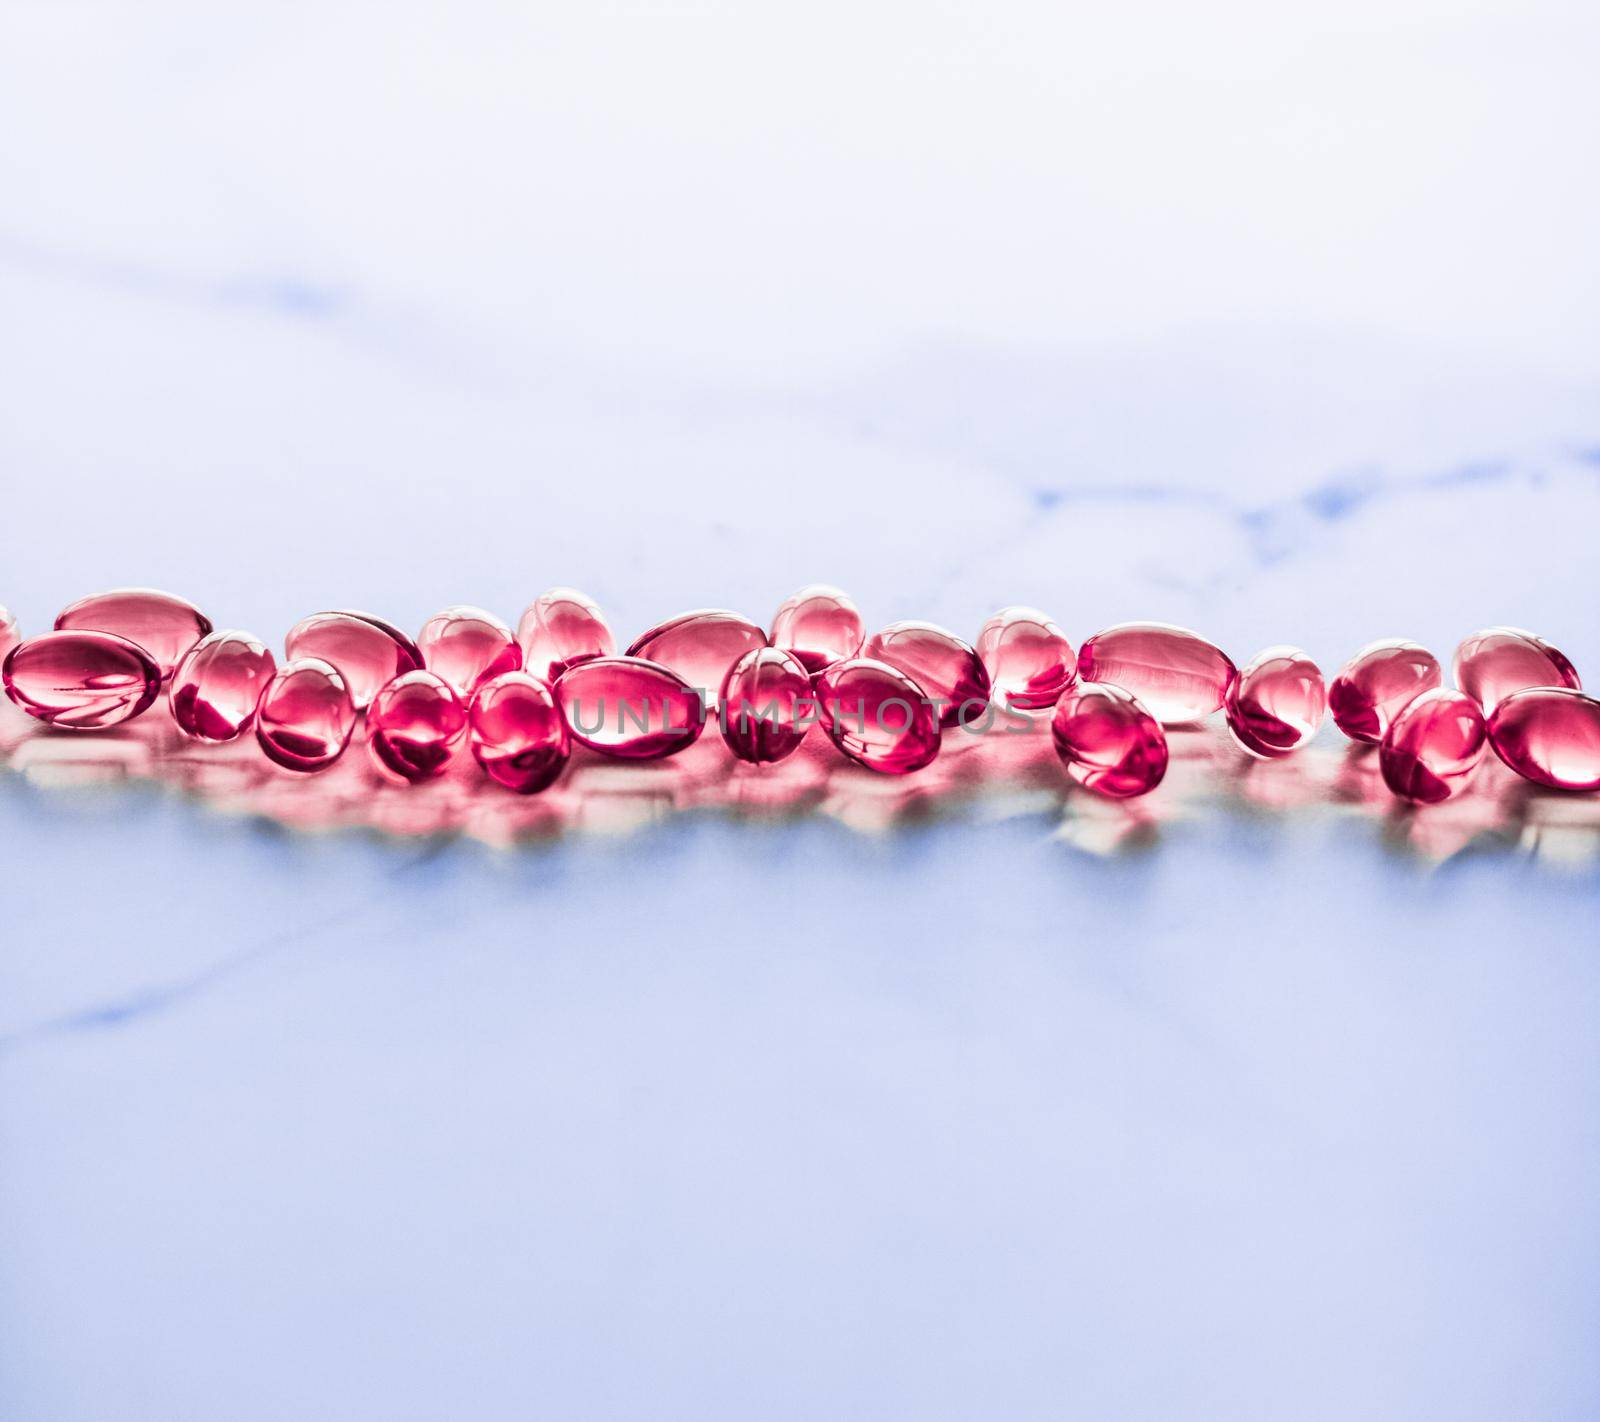 Red pills for healthy diet nutrition, supplements pill and probiotics capsules, healthcare and medicine as pharmacy and scientific research background by Anneleven